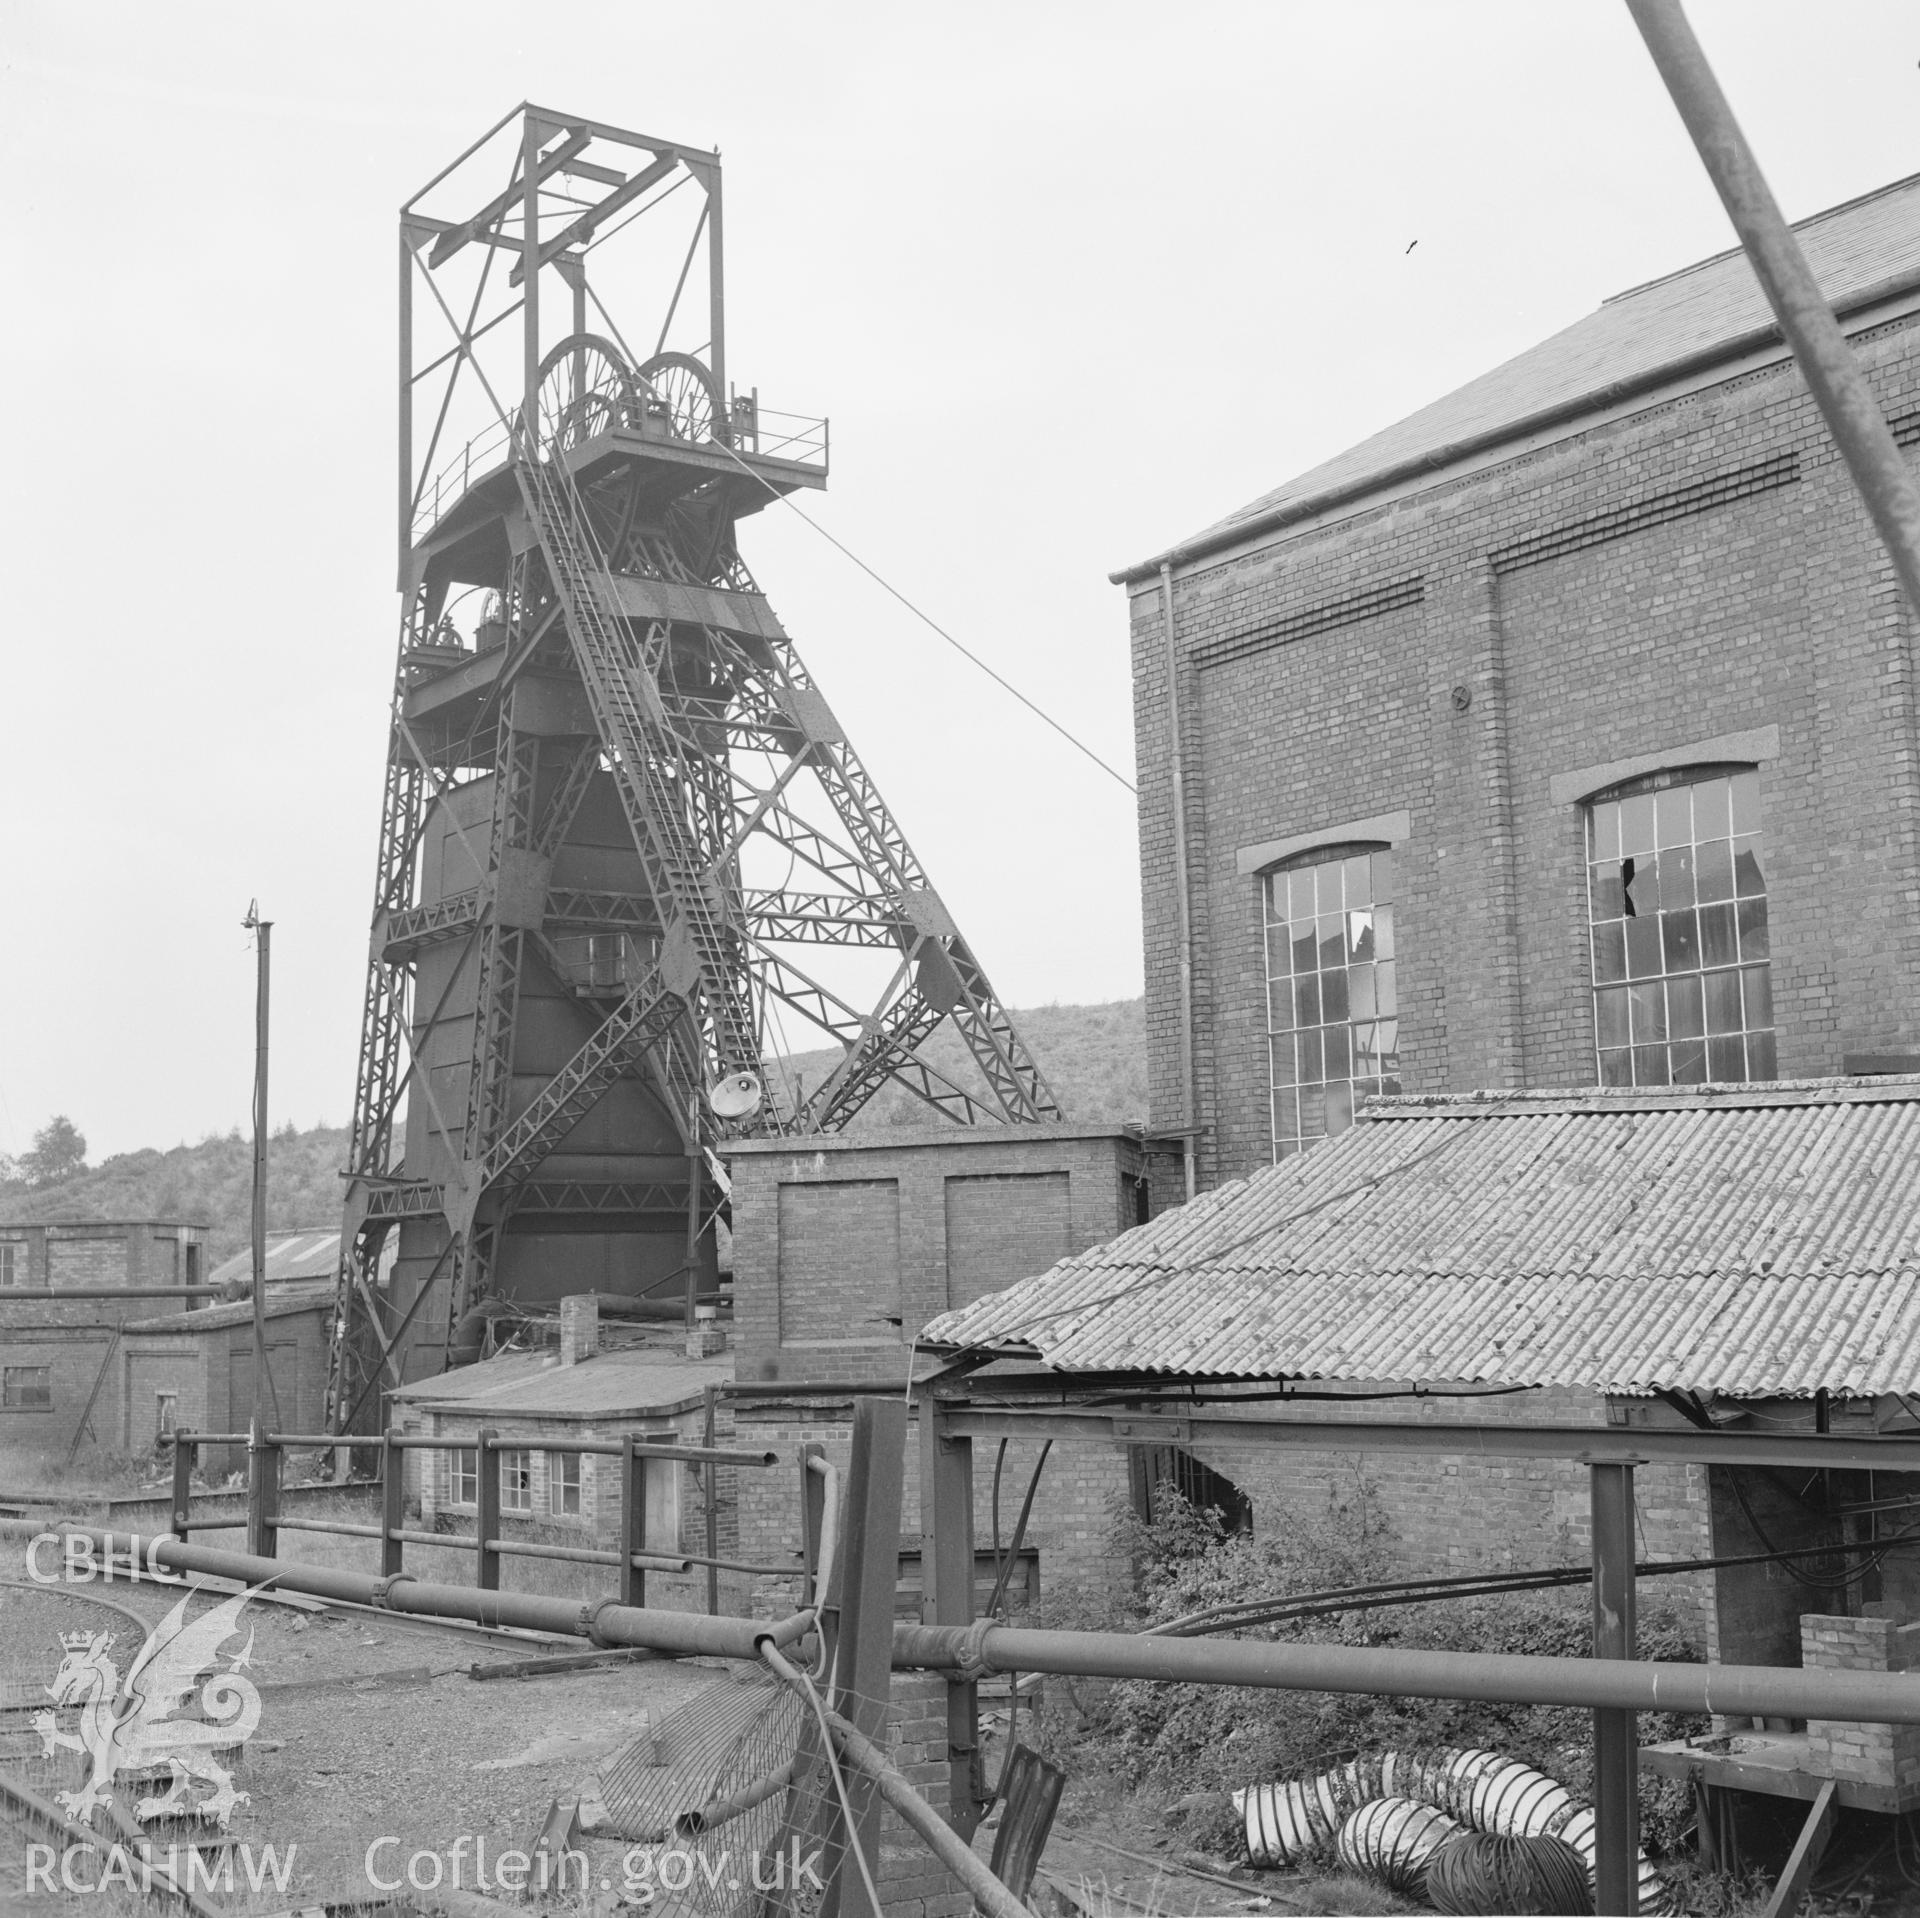 Digital copy of an acetate negative showing upcast shaft and engine house at Cefncoed Colliery, from the John Cornwell Collection.